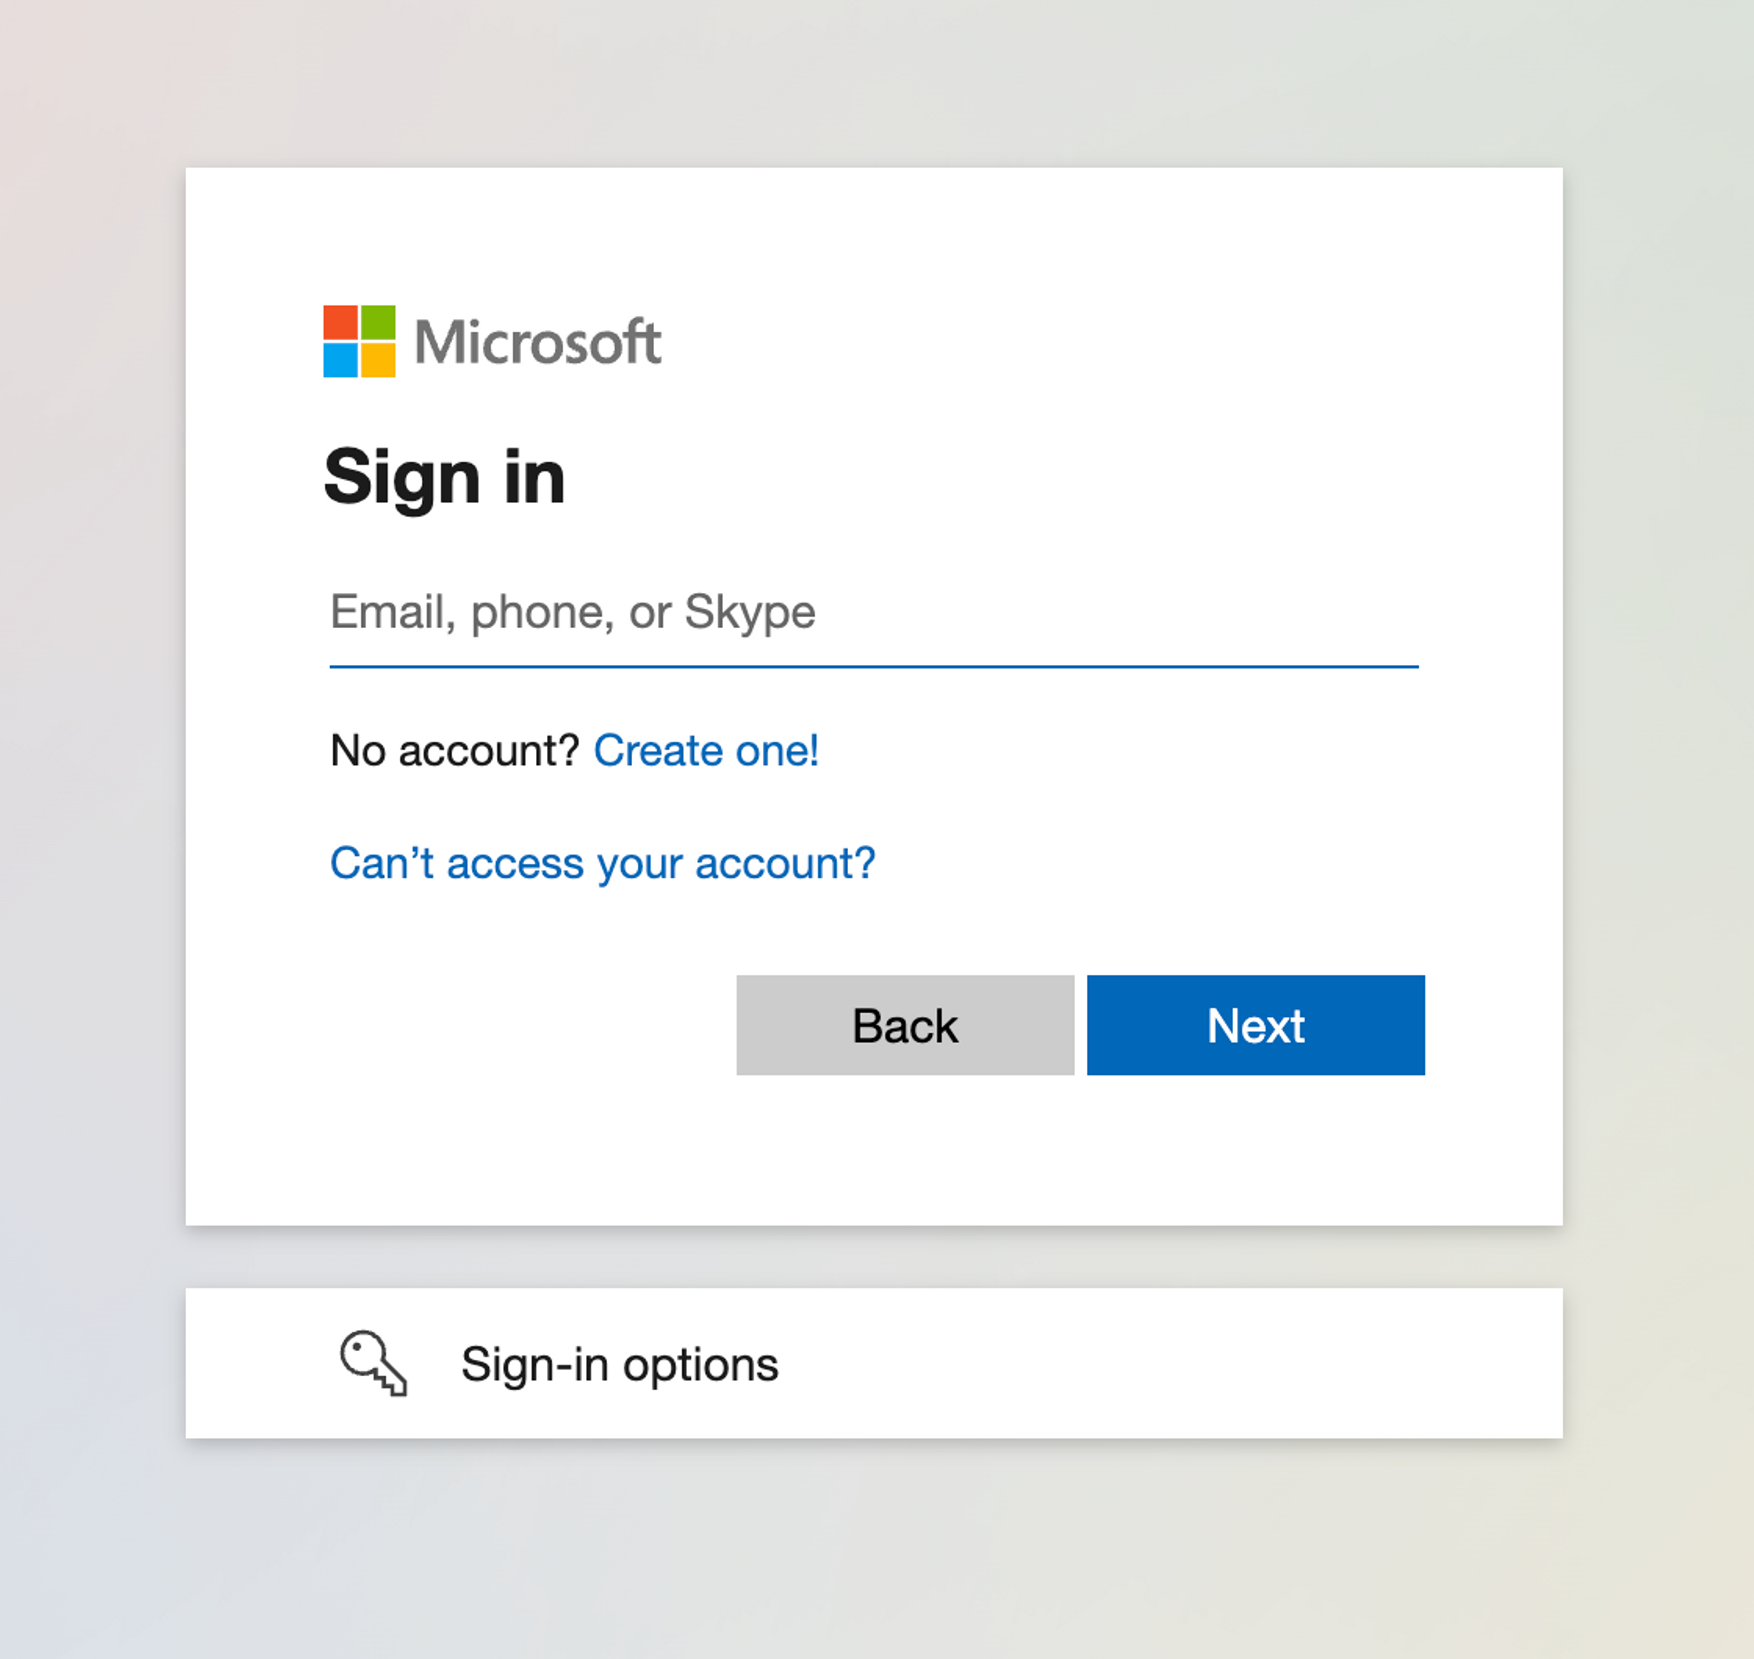 Log in with Microsoft